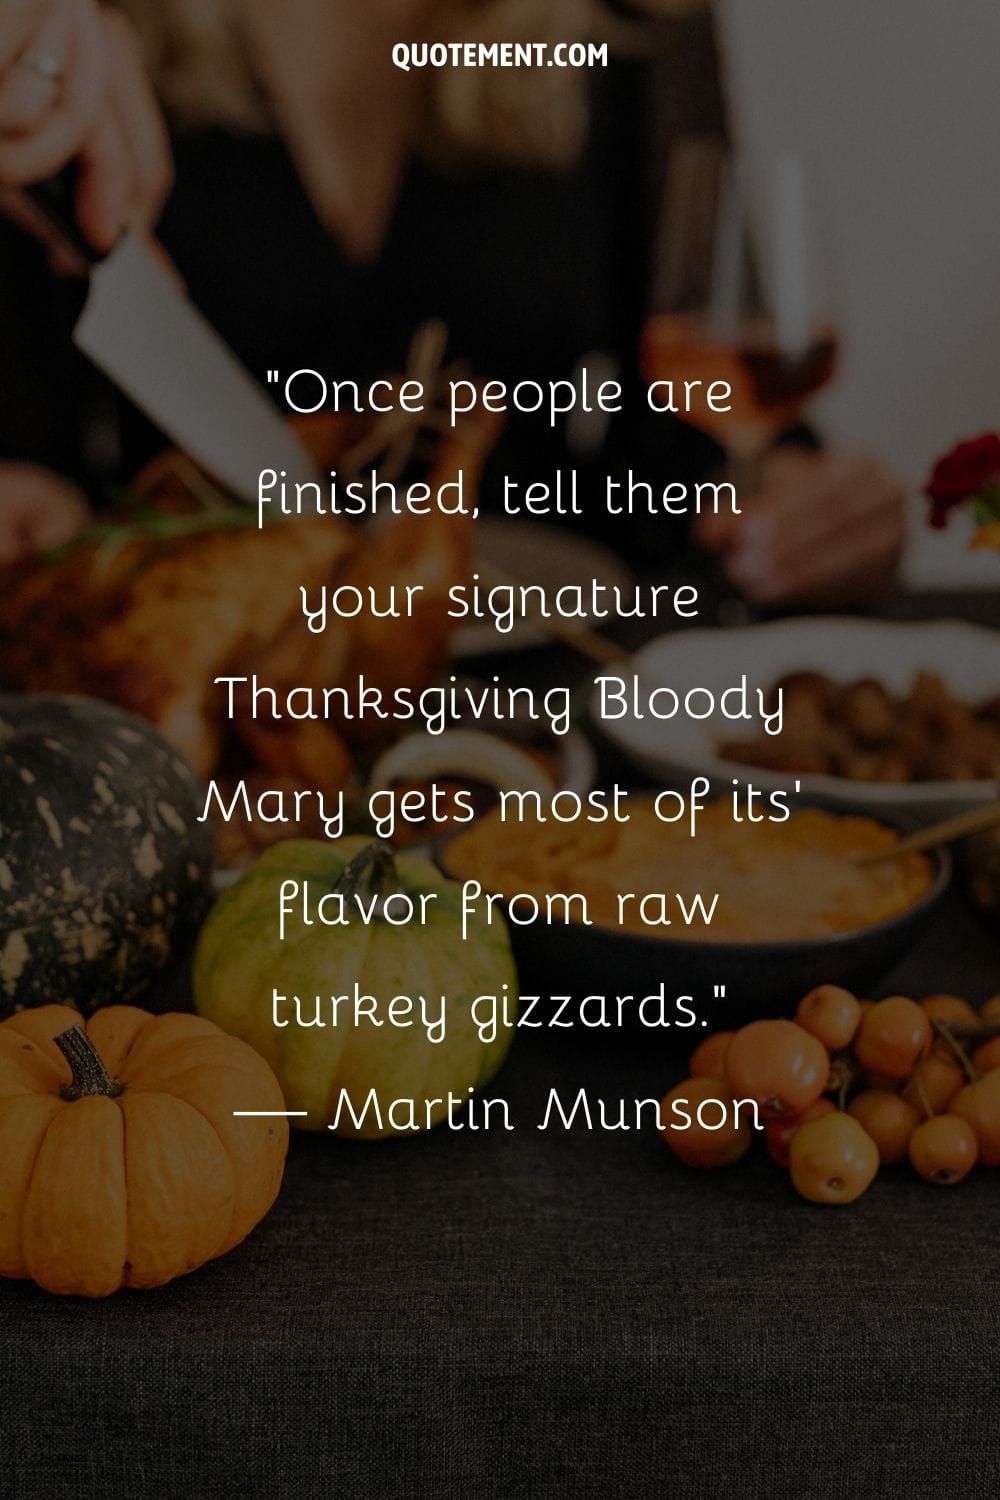 a hand slices the Thanksgiving turkey amid holiday decor